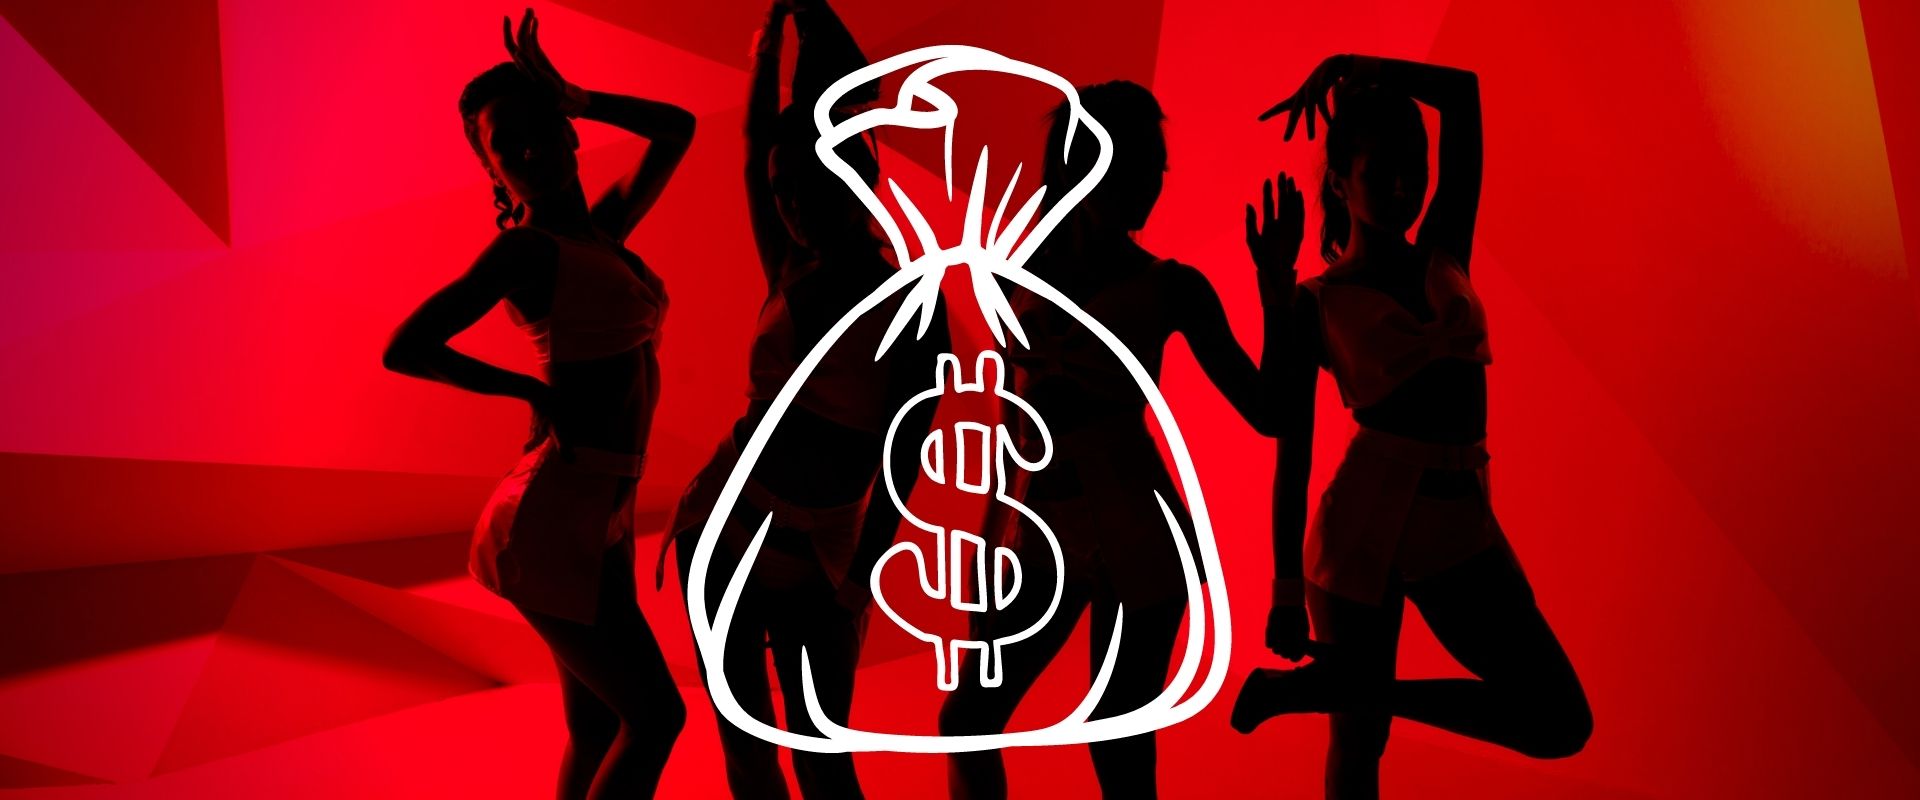 100 Ways To Make Money Sexually Online (Without Showing Your Face) photo